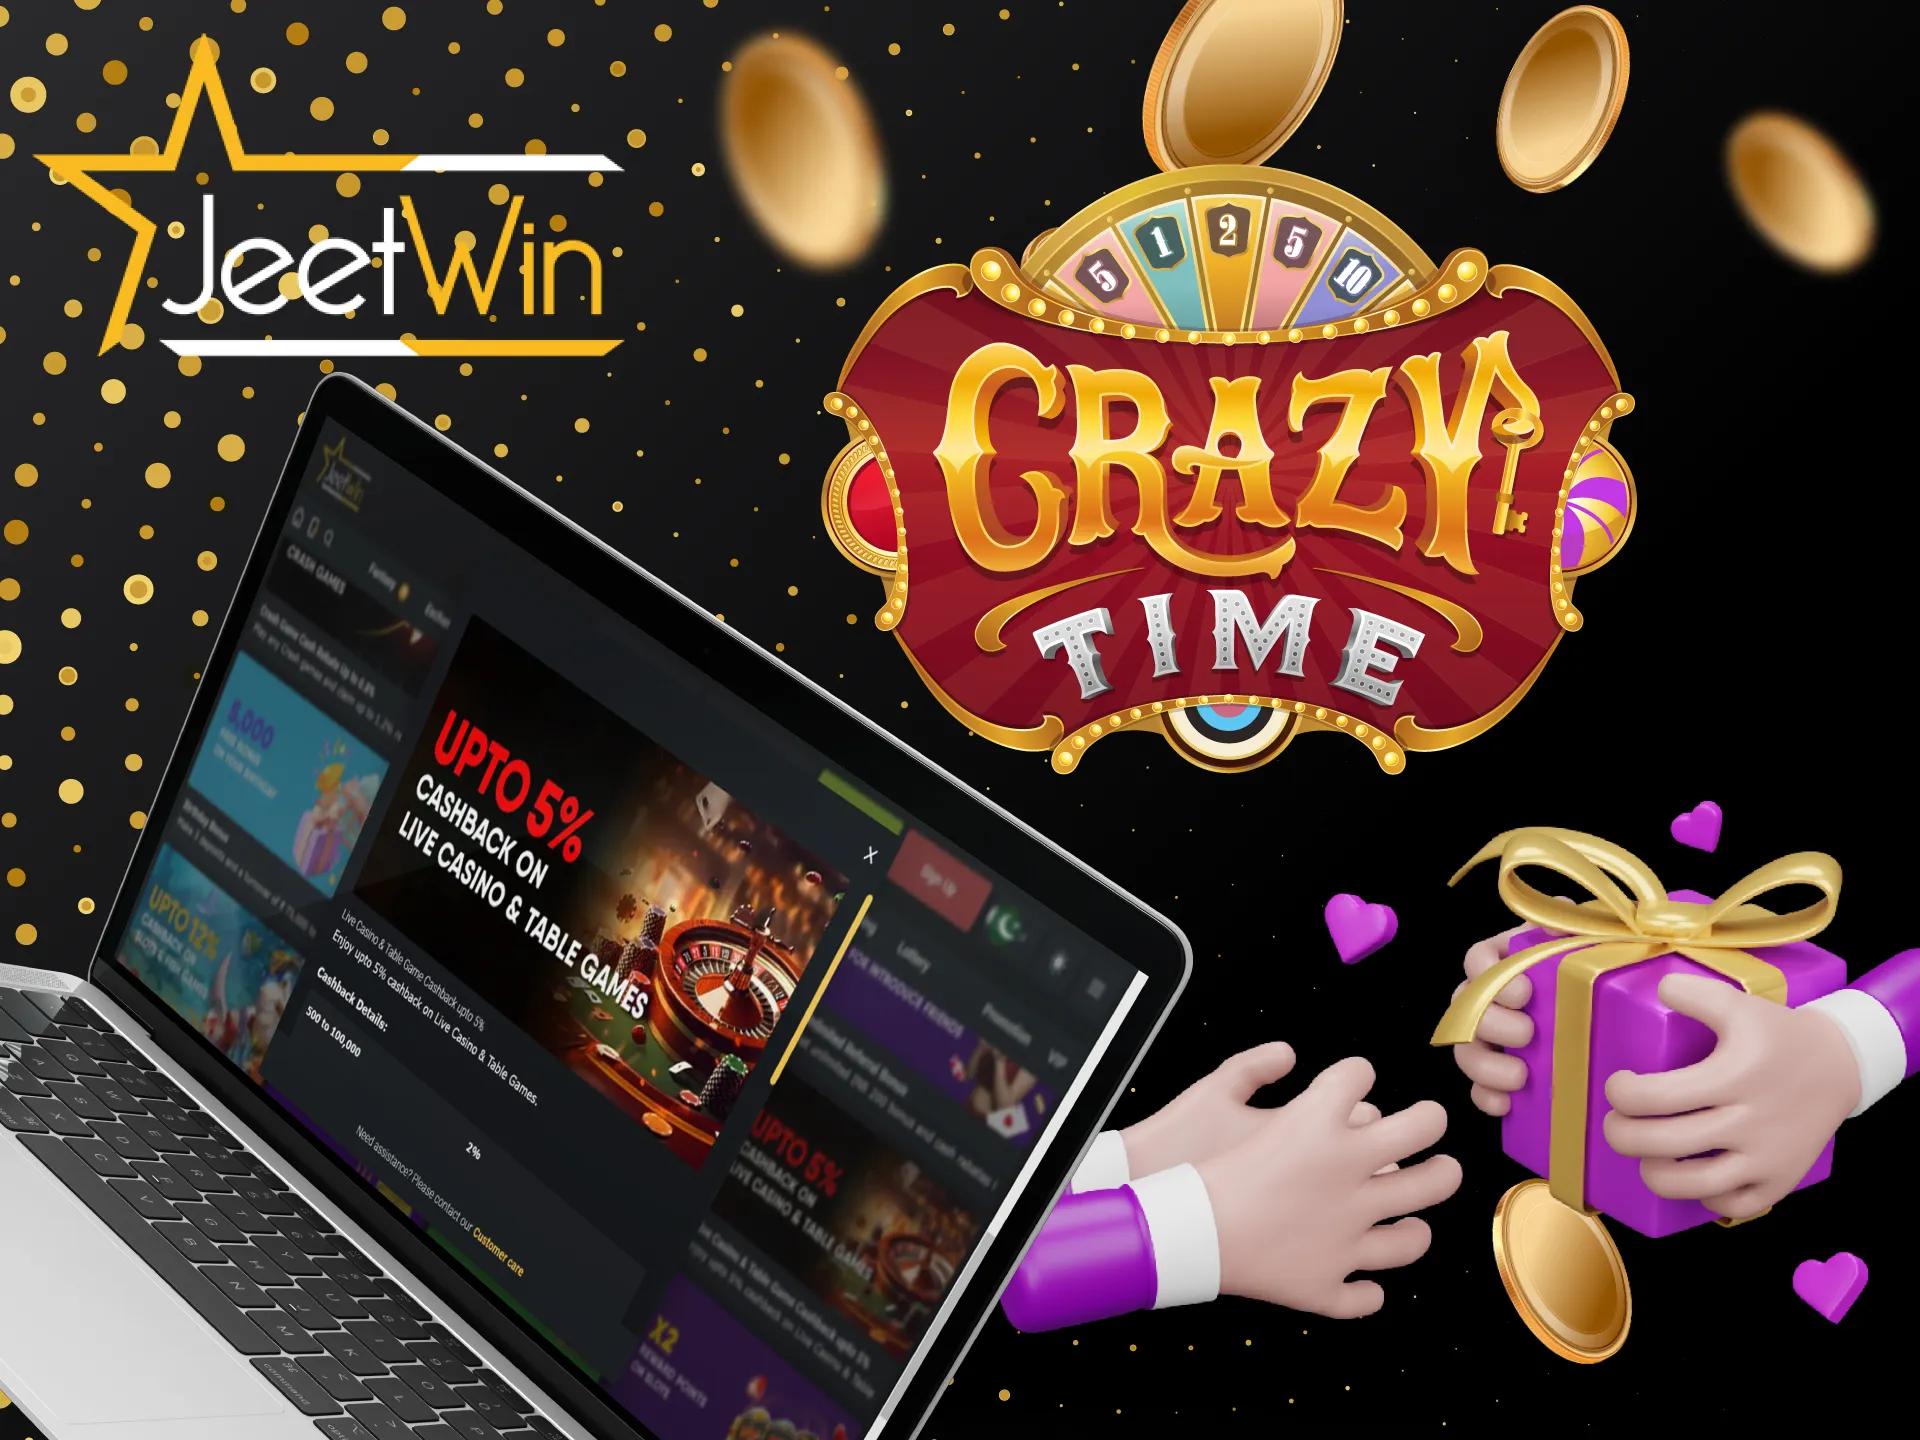 Don't miss the opportunity to take advantage of the bonus on Crazy Time at JeetWin.